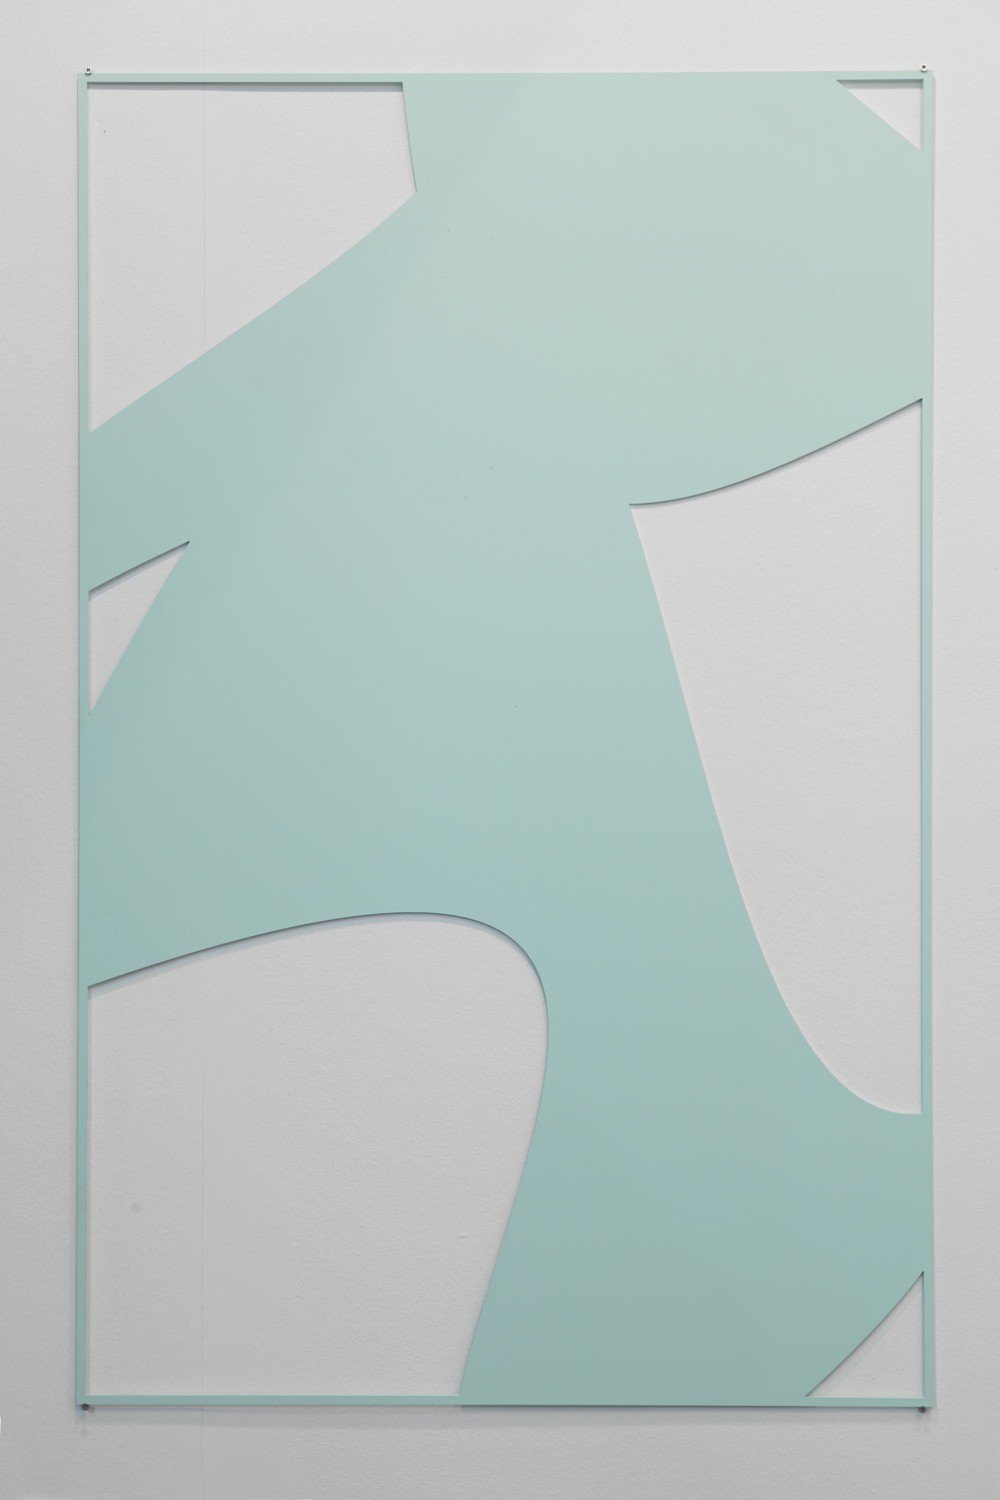 Andy BootUntitled, 2013Lacquer on cut metal structure140 x 90 cm